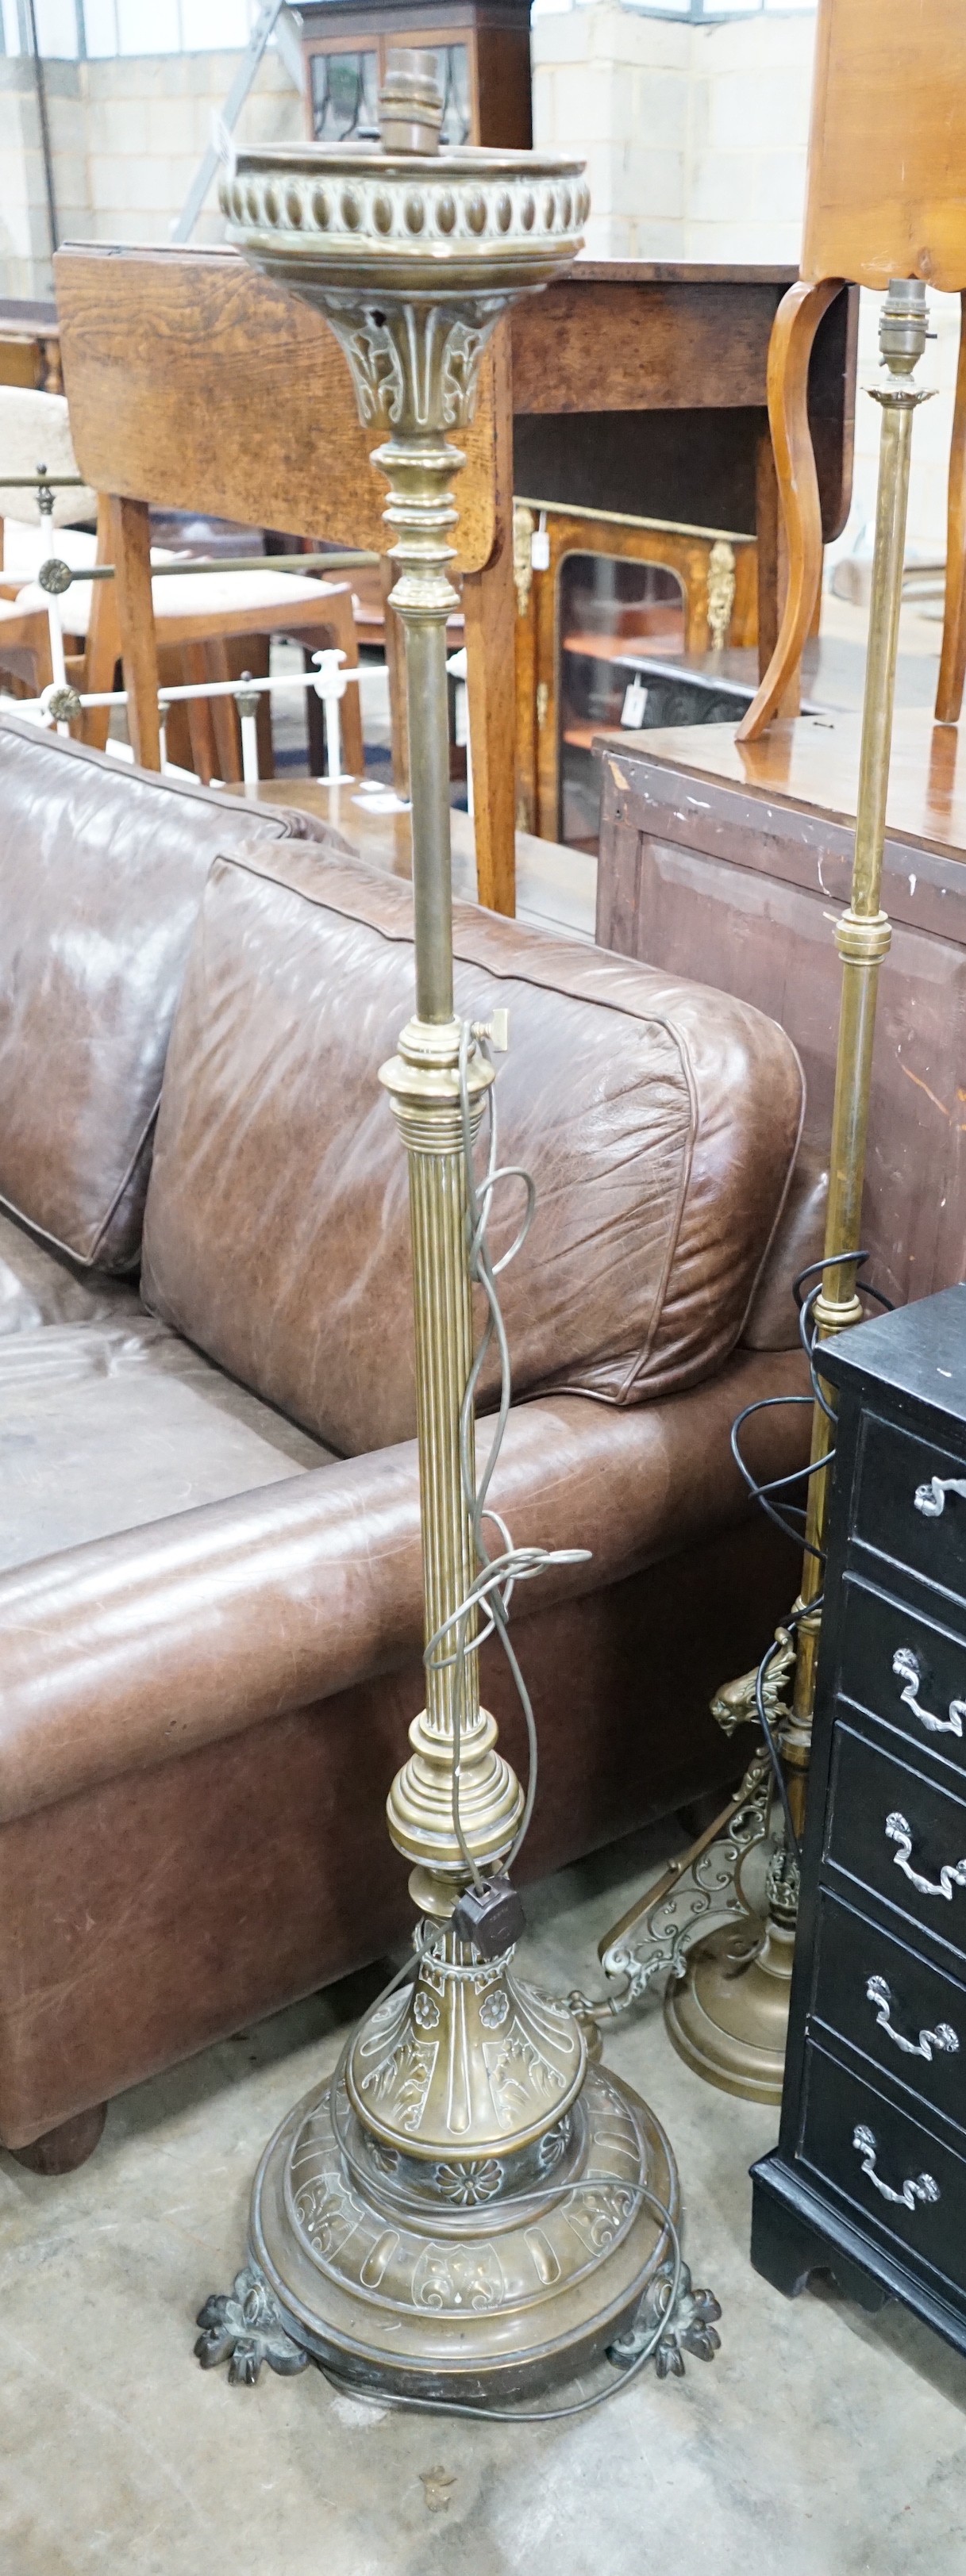 Two late 19th / early 20th century brass telescopic oil standard lamps converted to electricity.